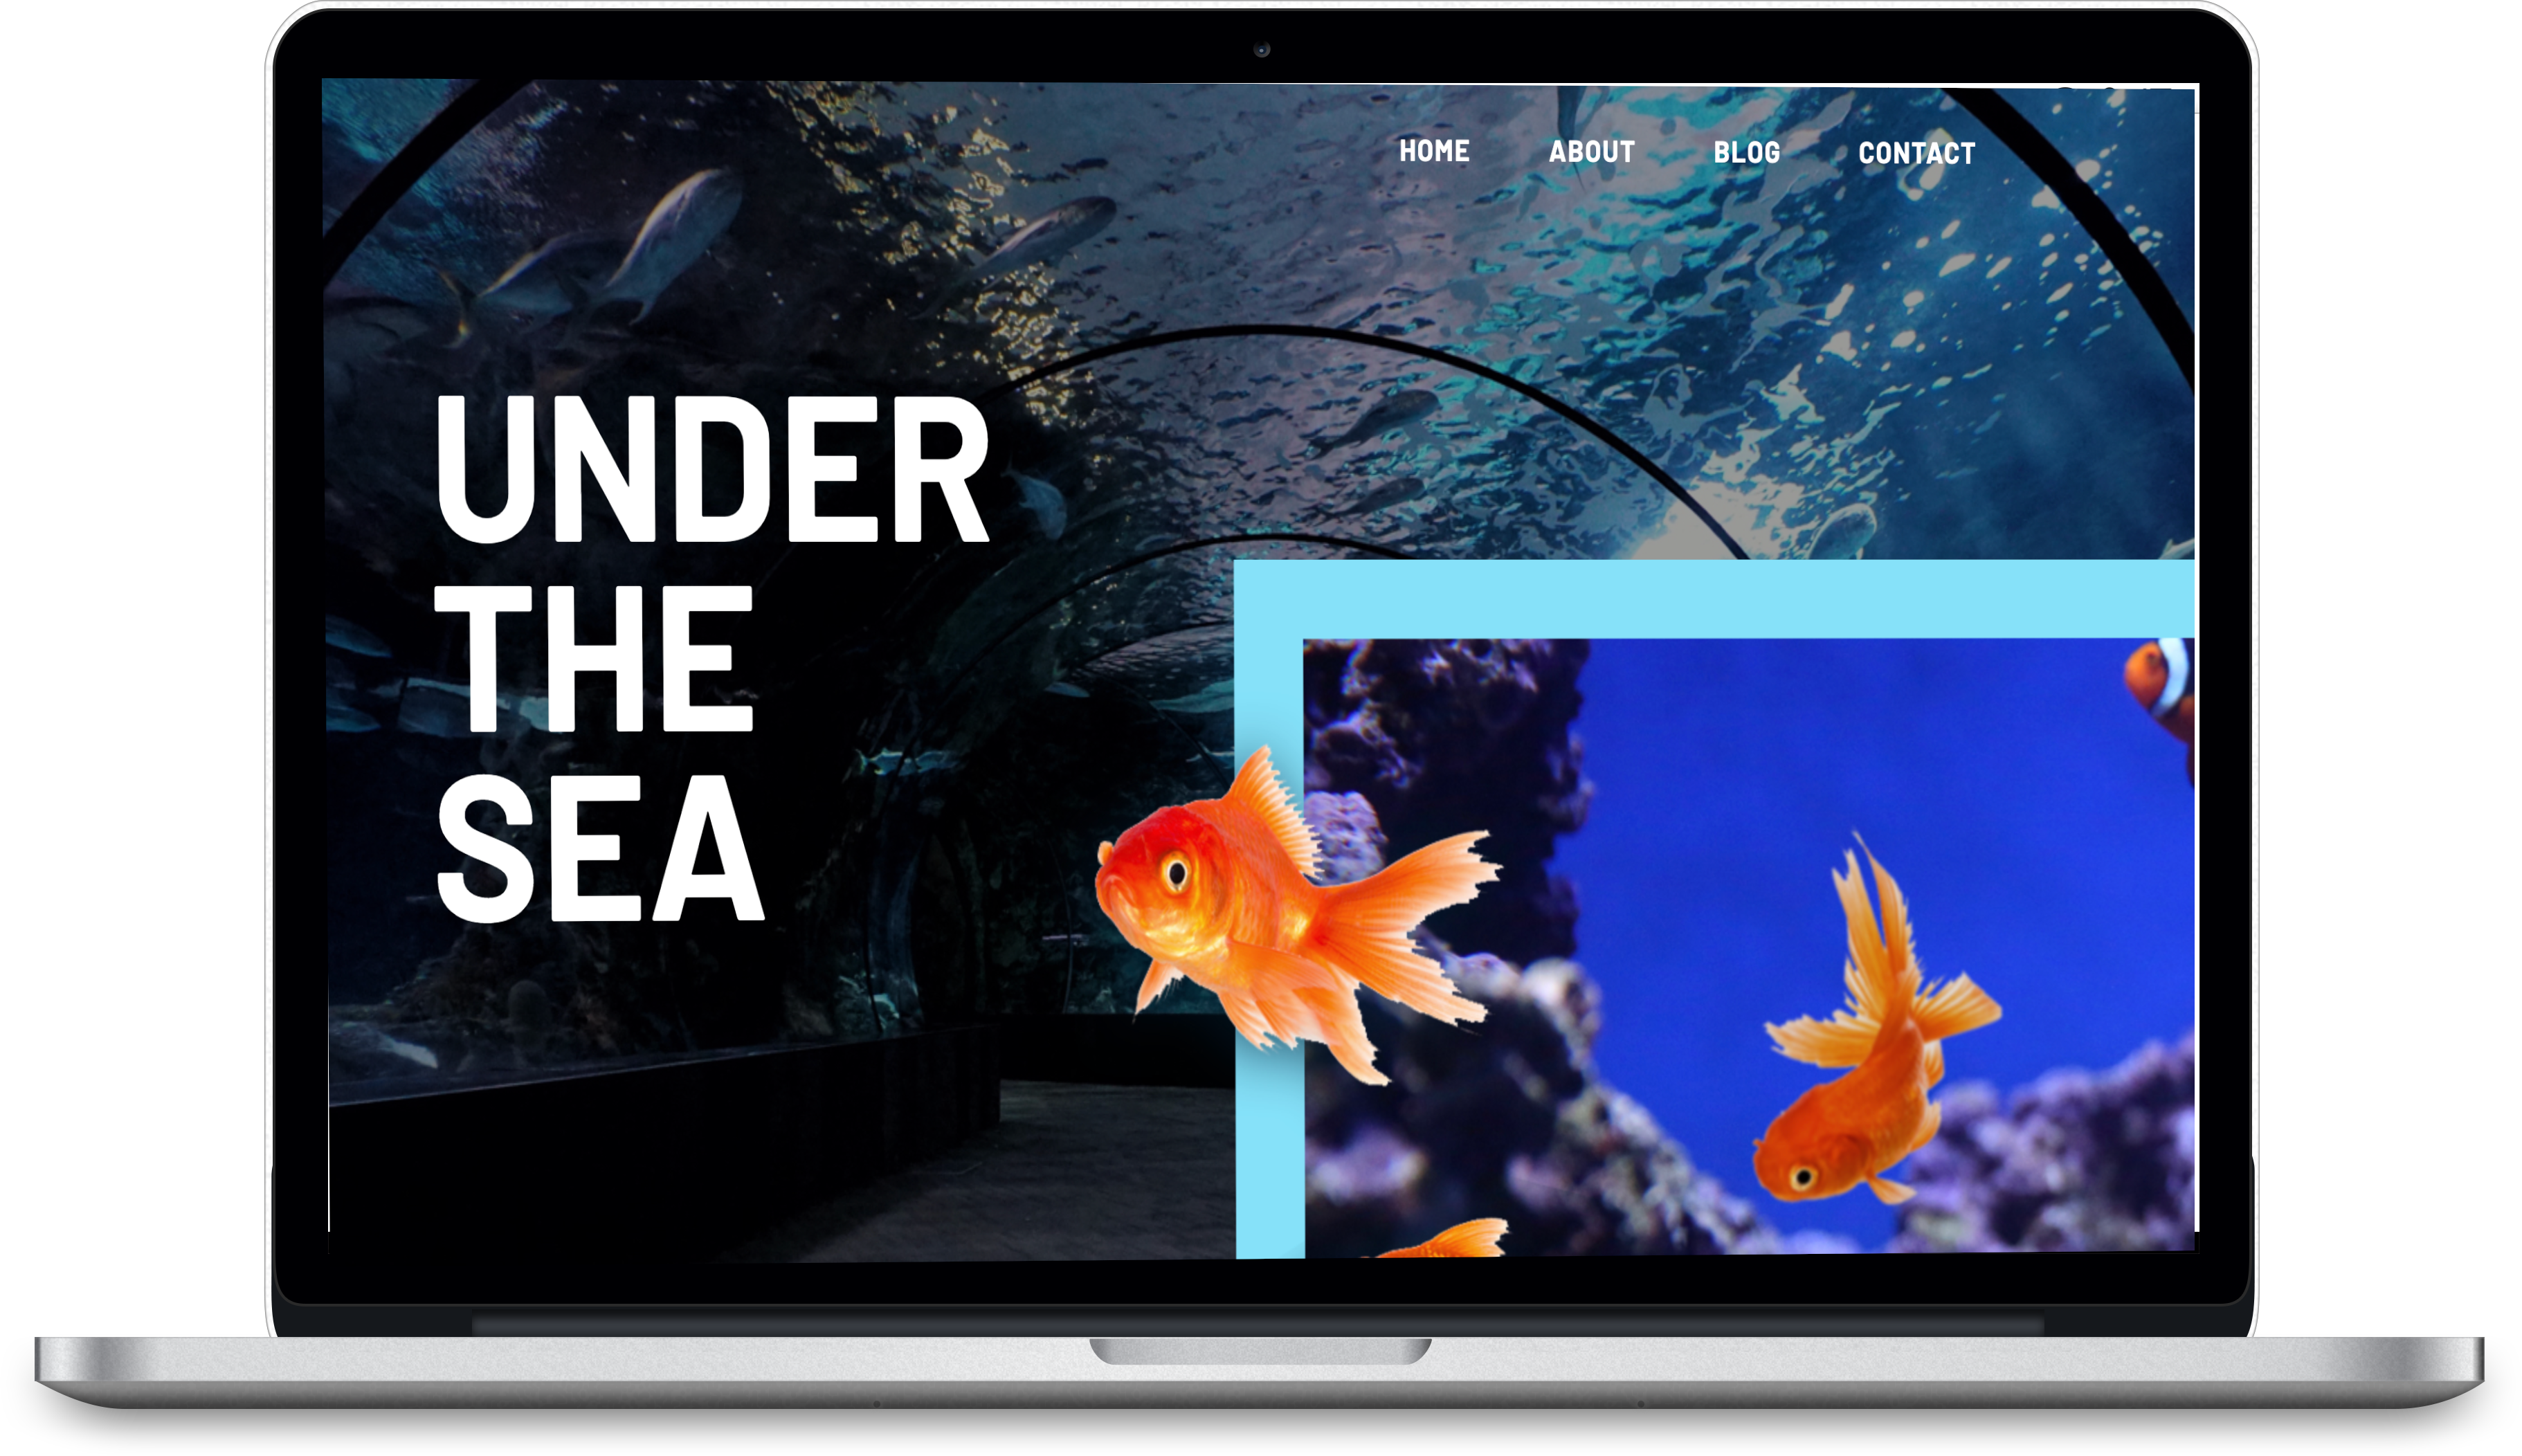 An image of website called under the sea its about aquarium